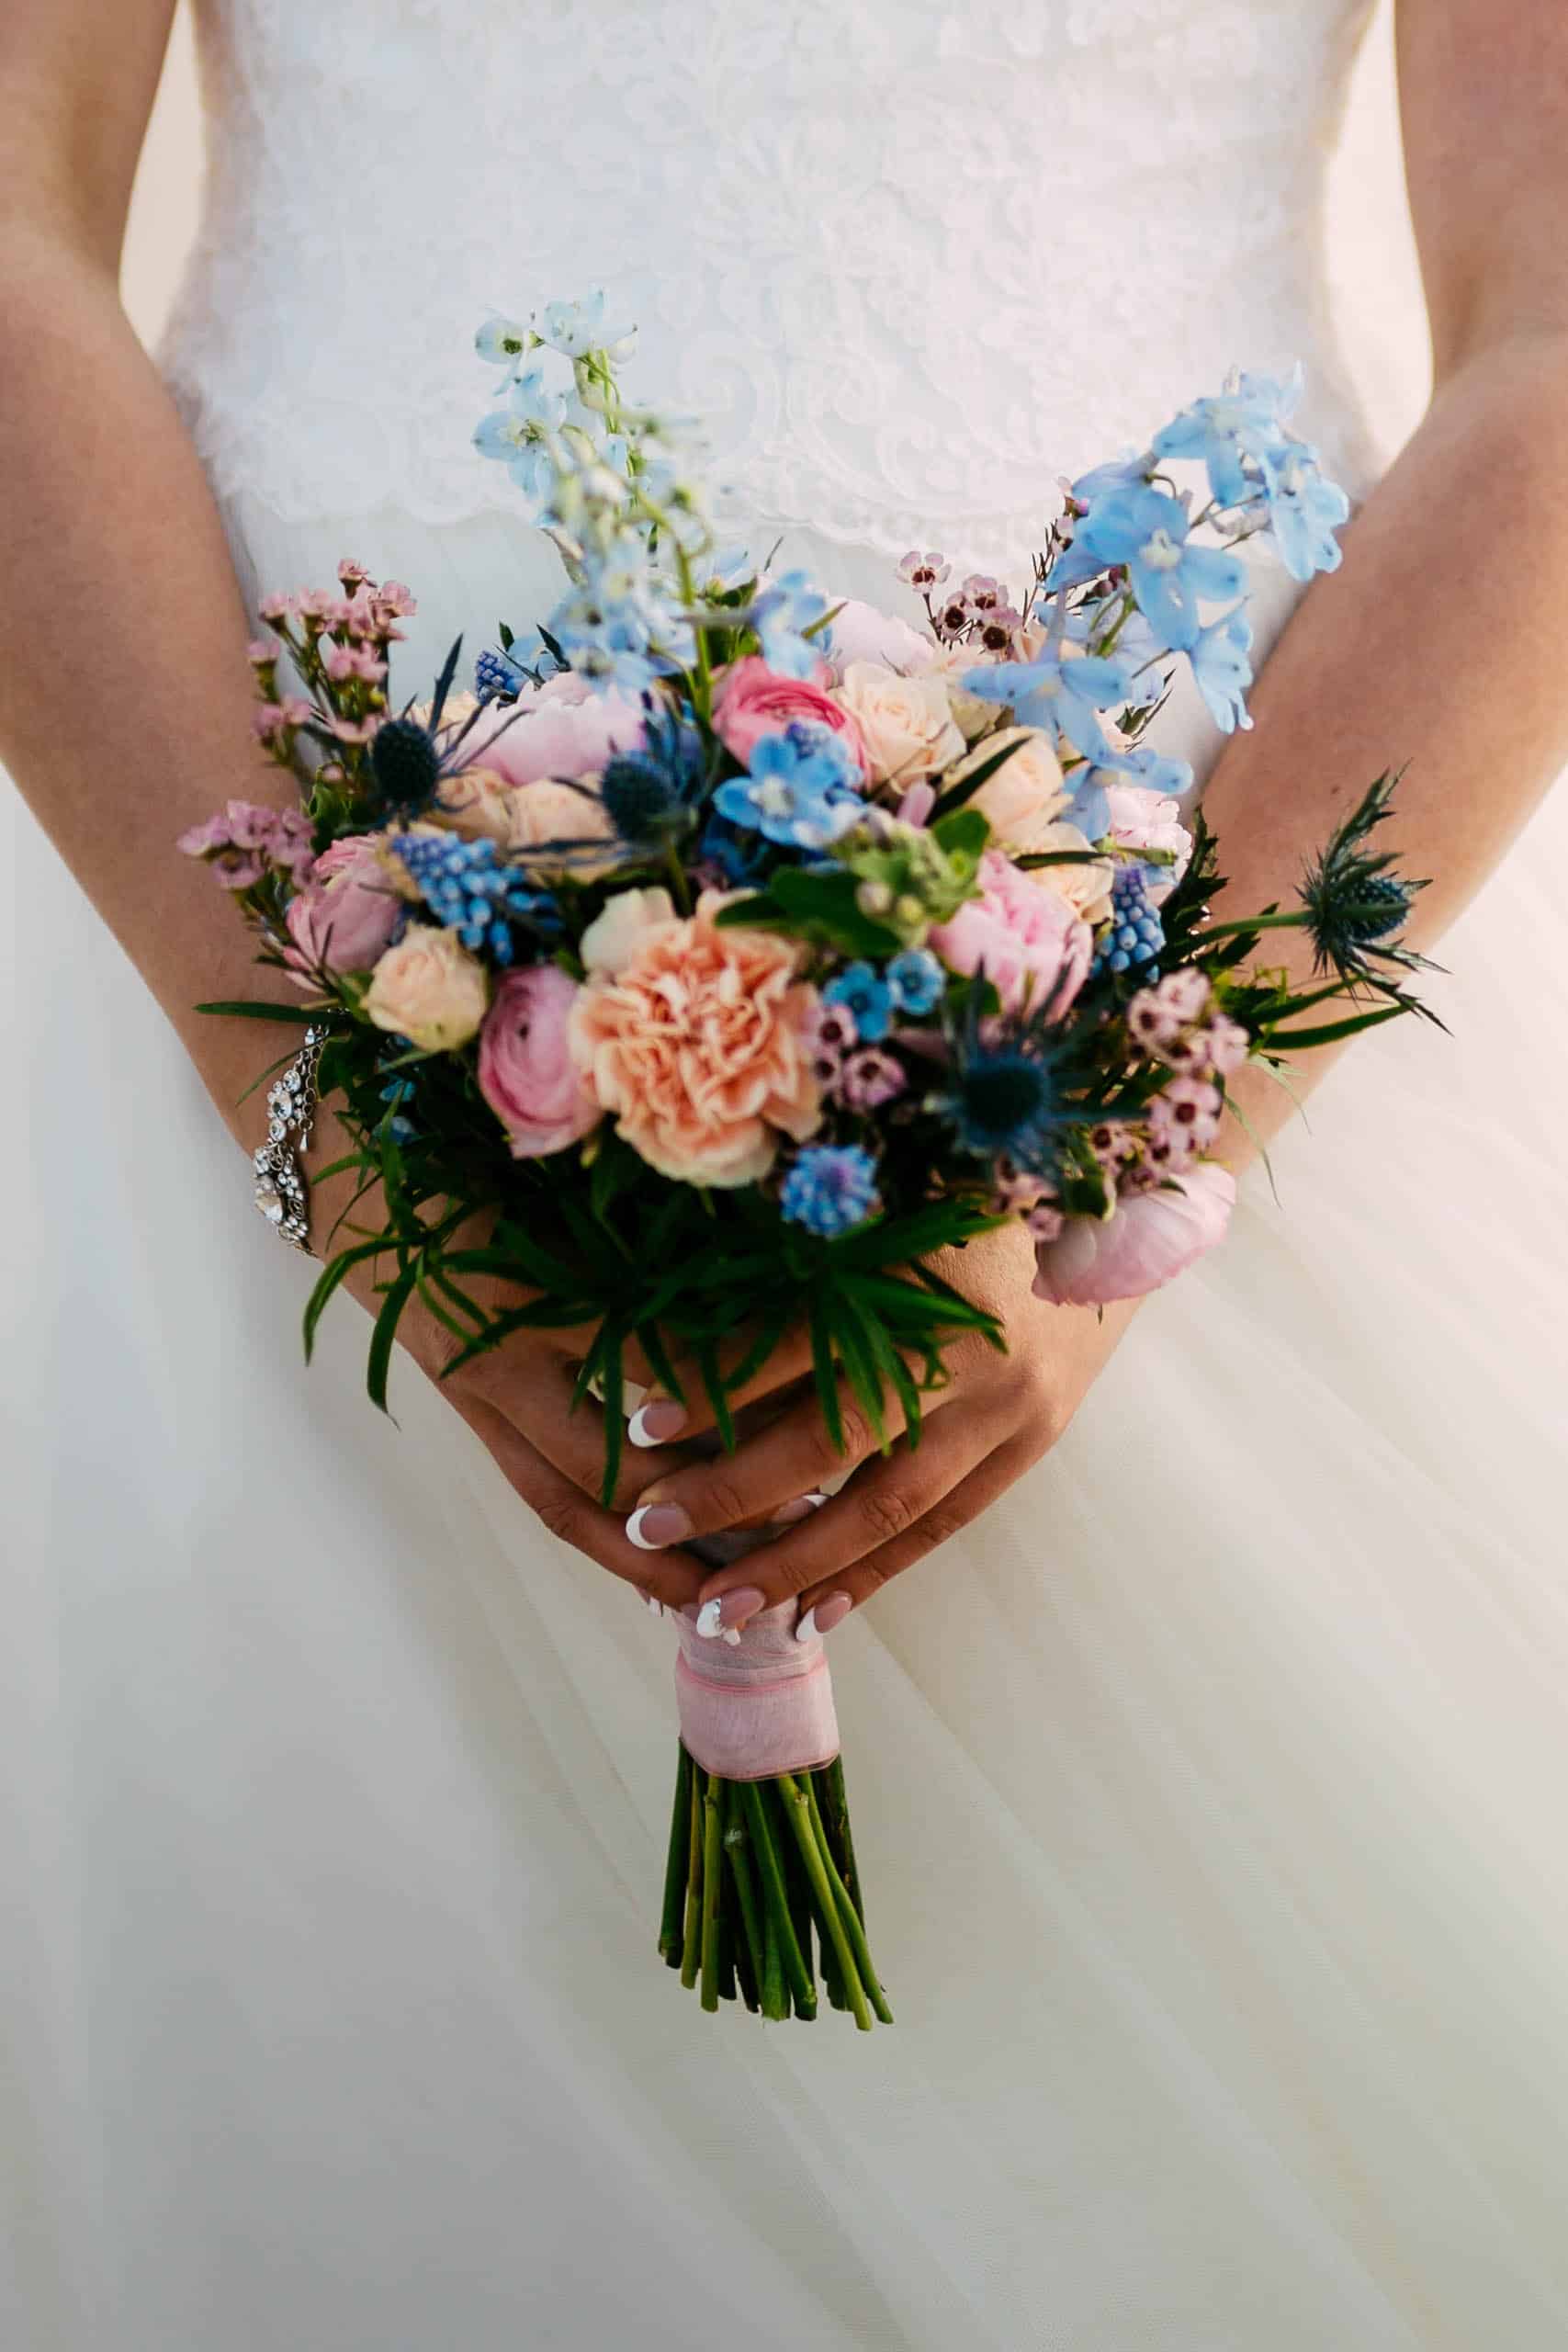 A bride with a wedding bouquet of blue and pink flowers.